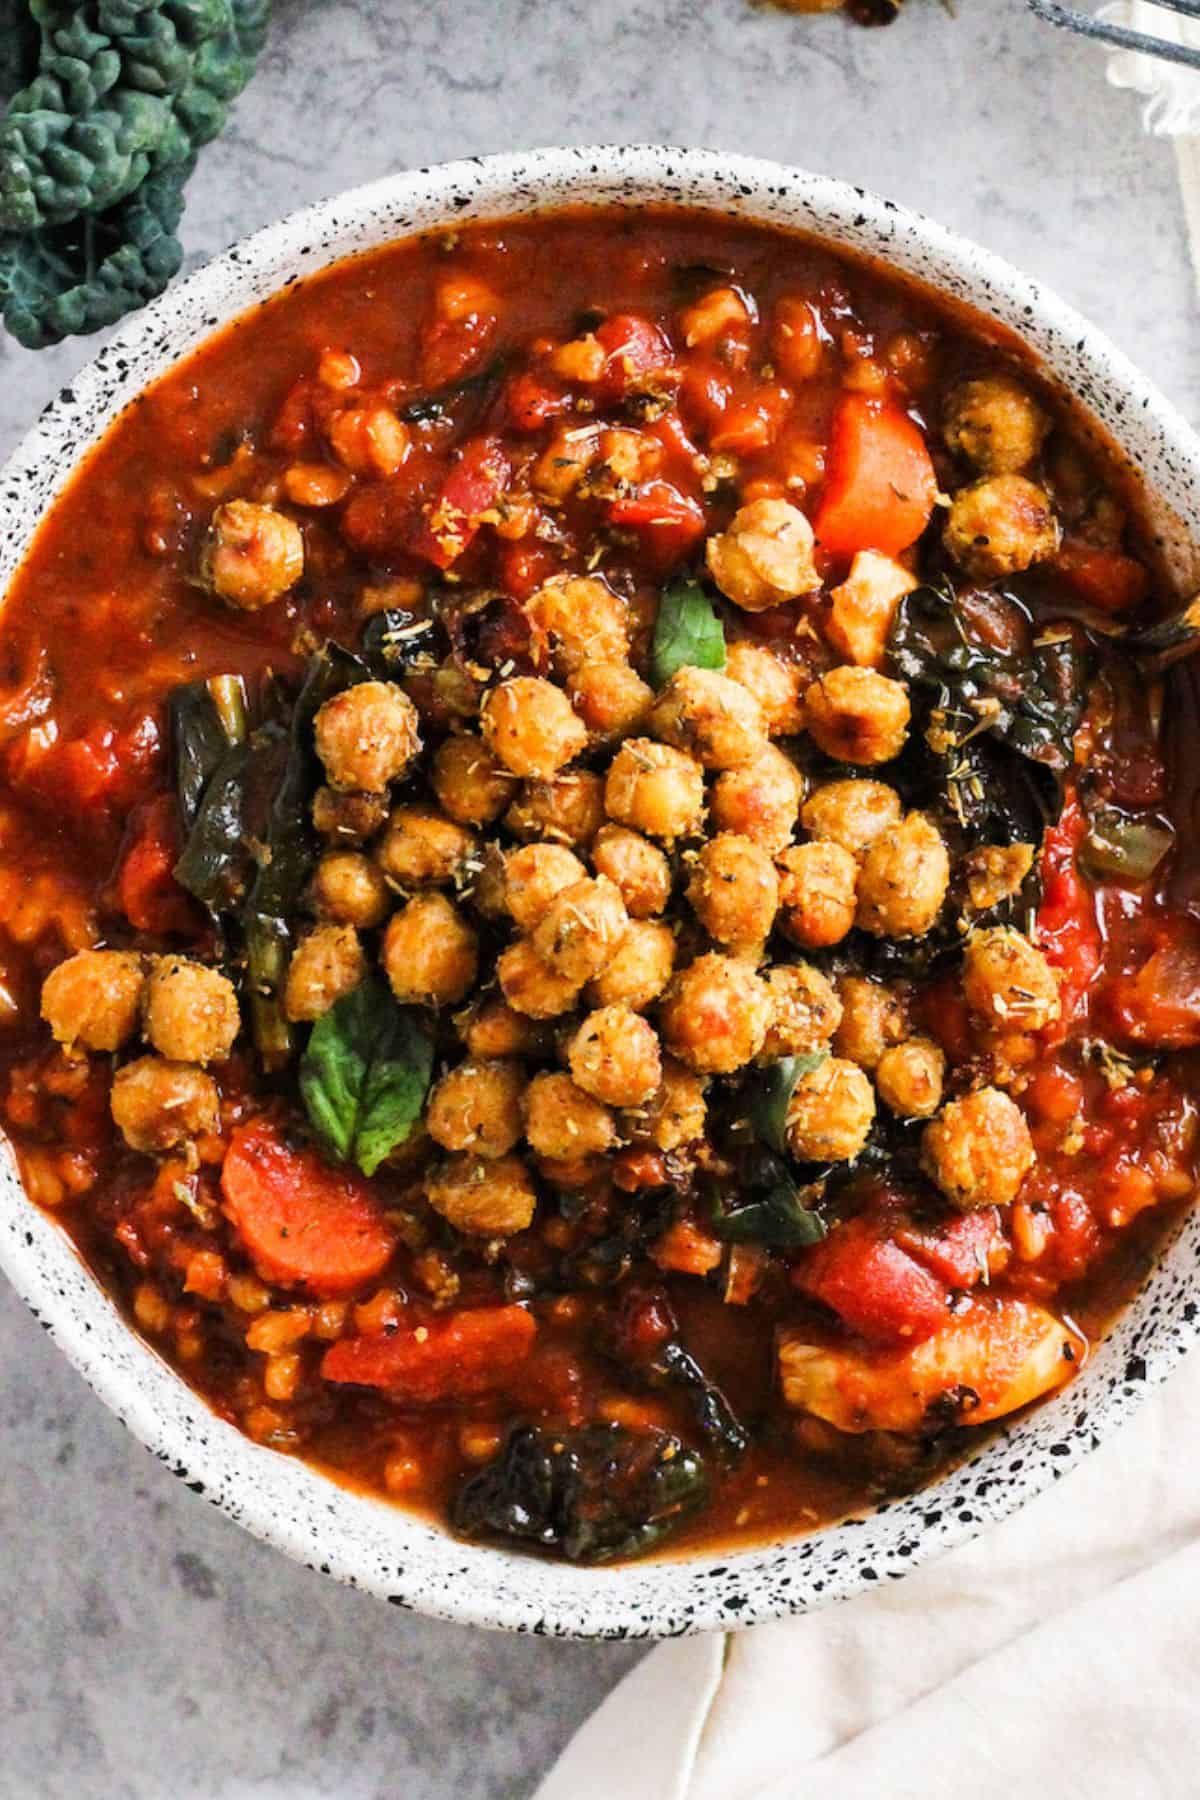 Vegan Tomato Barley Soup with vegetables topped with roasted chickpeas.